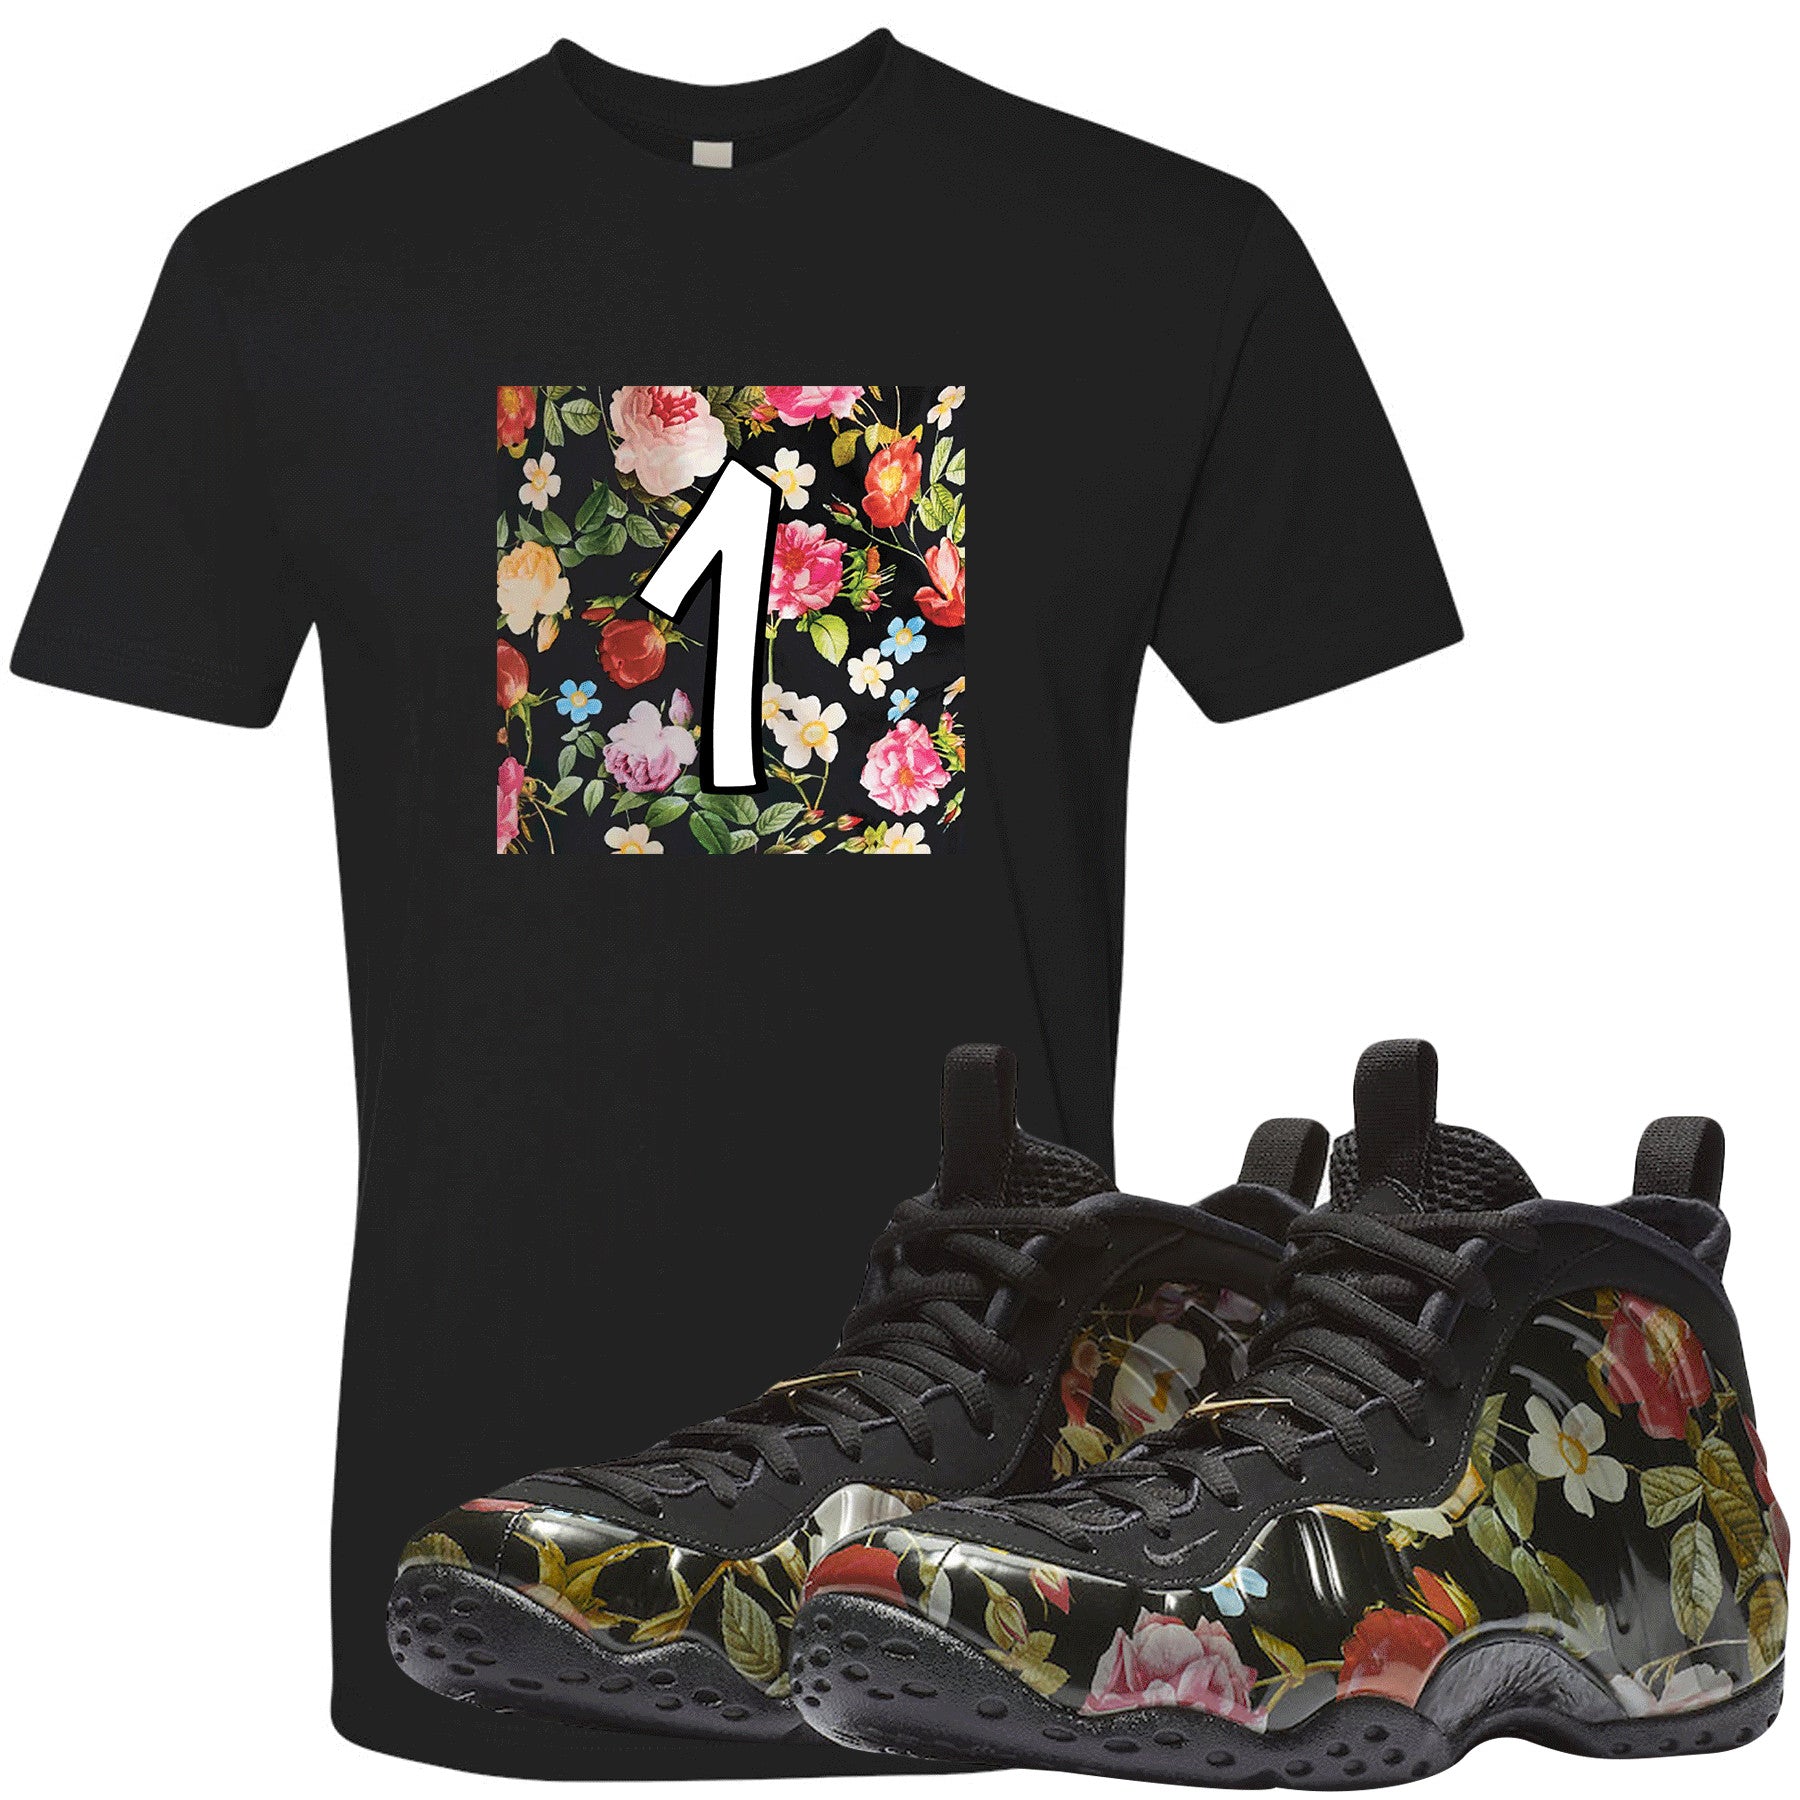 shirts to match floral foamposites